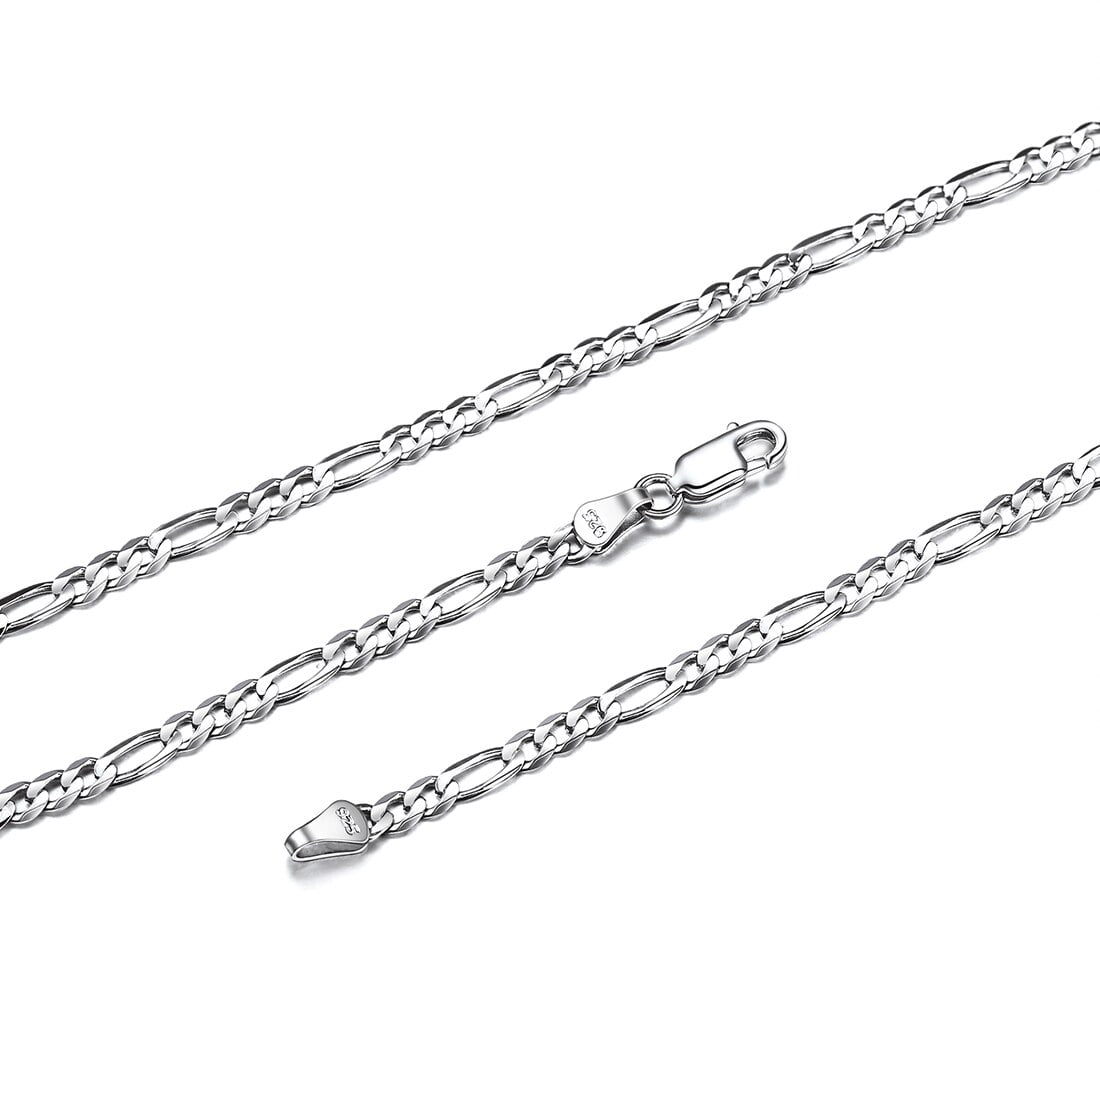 Solid 925 Sterling Silver 6mm Square Byzantine Chain Necklace 22